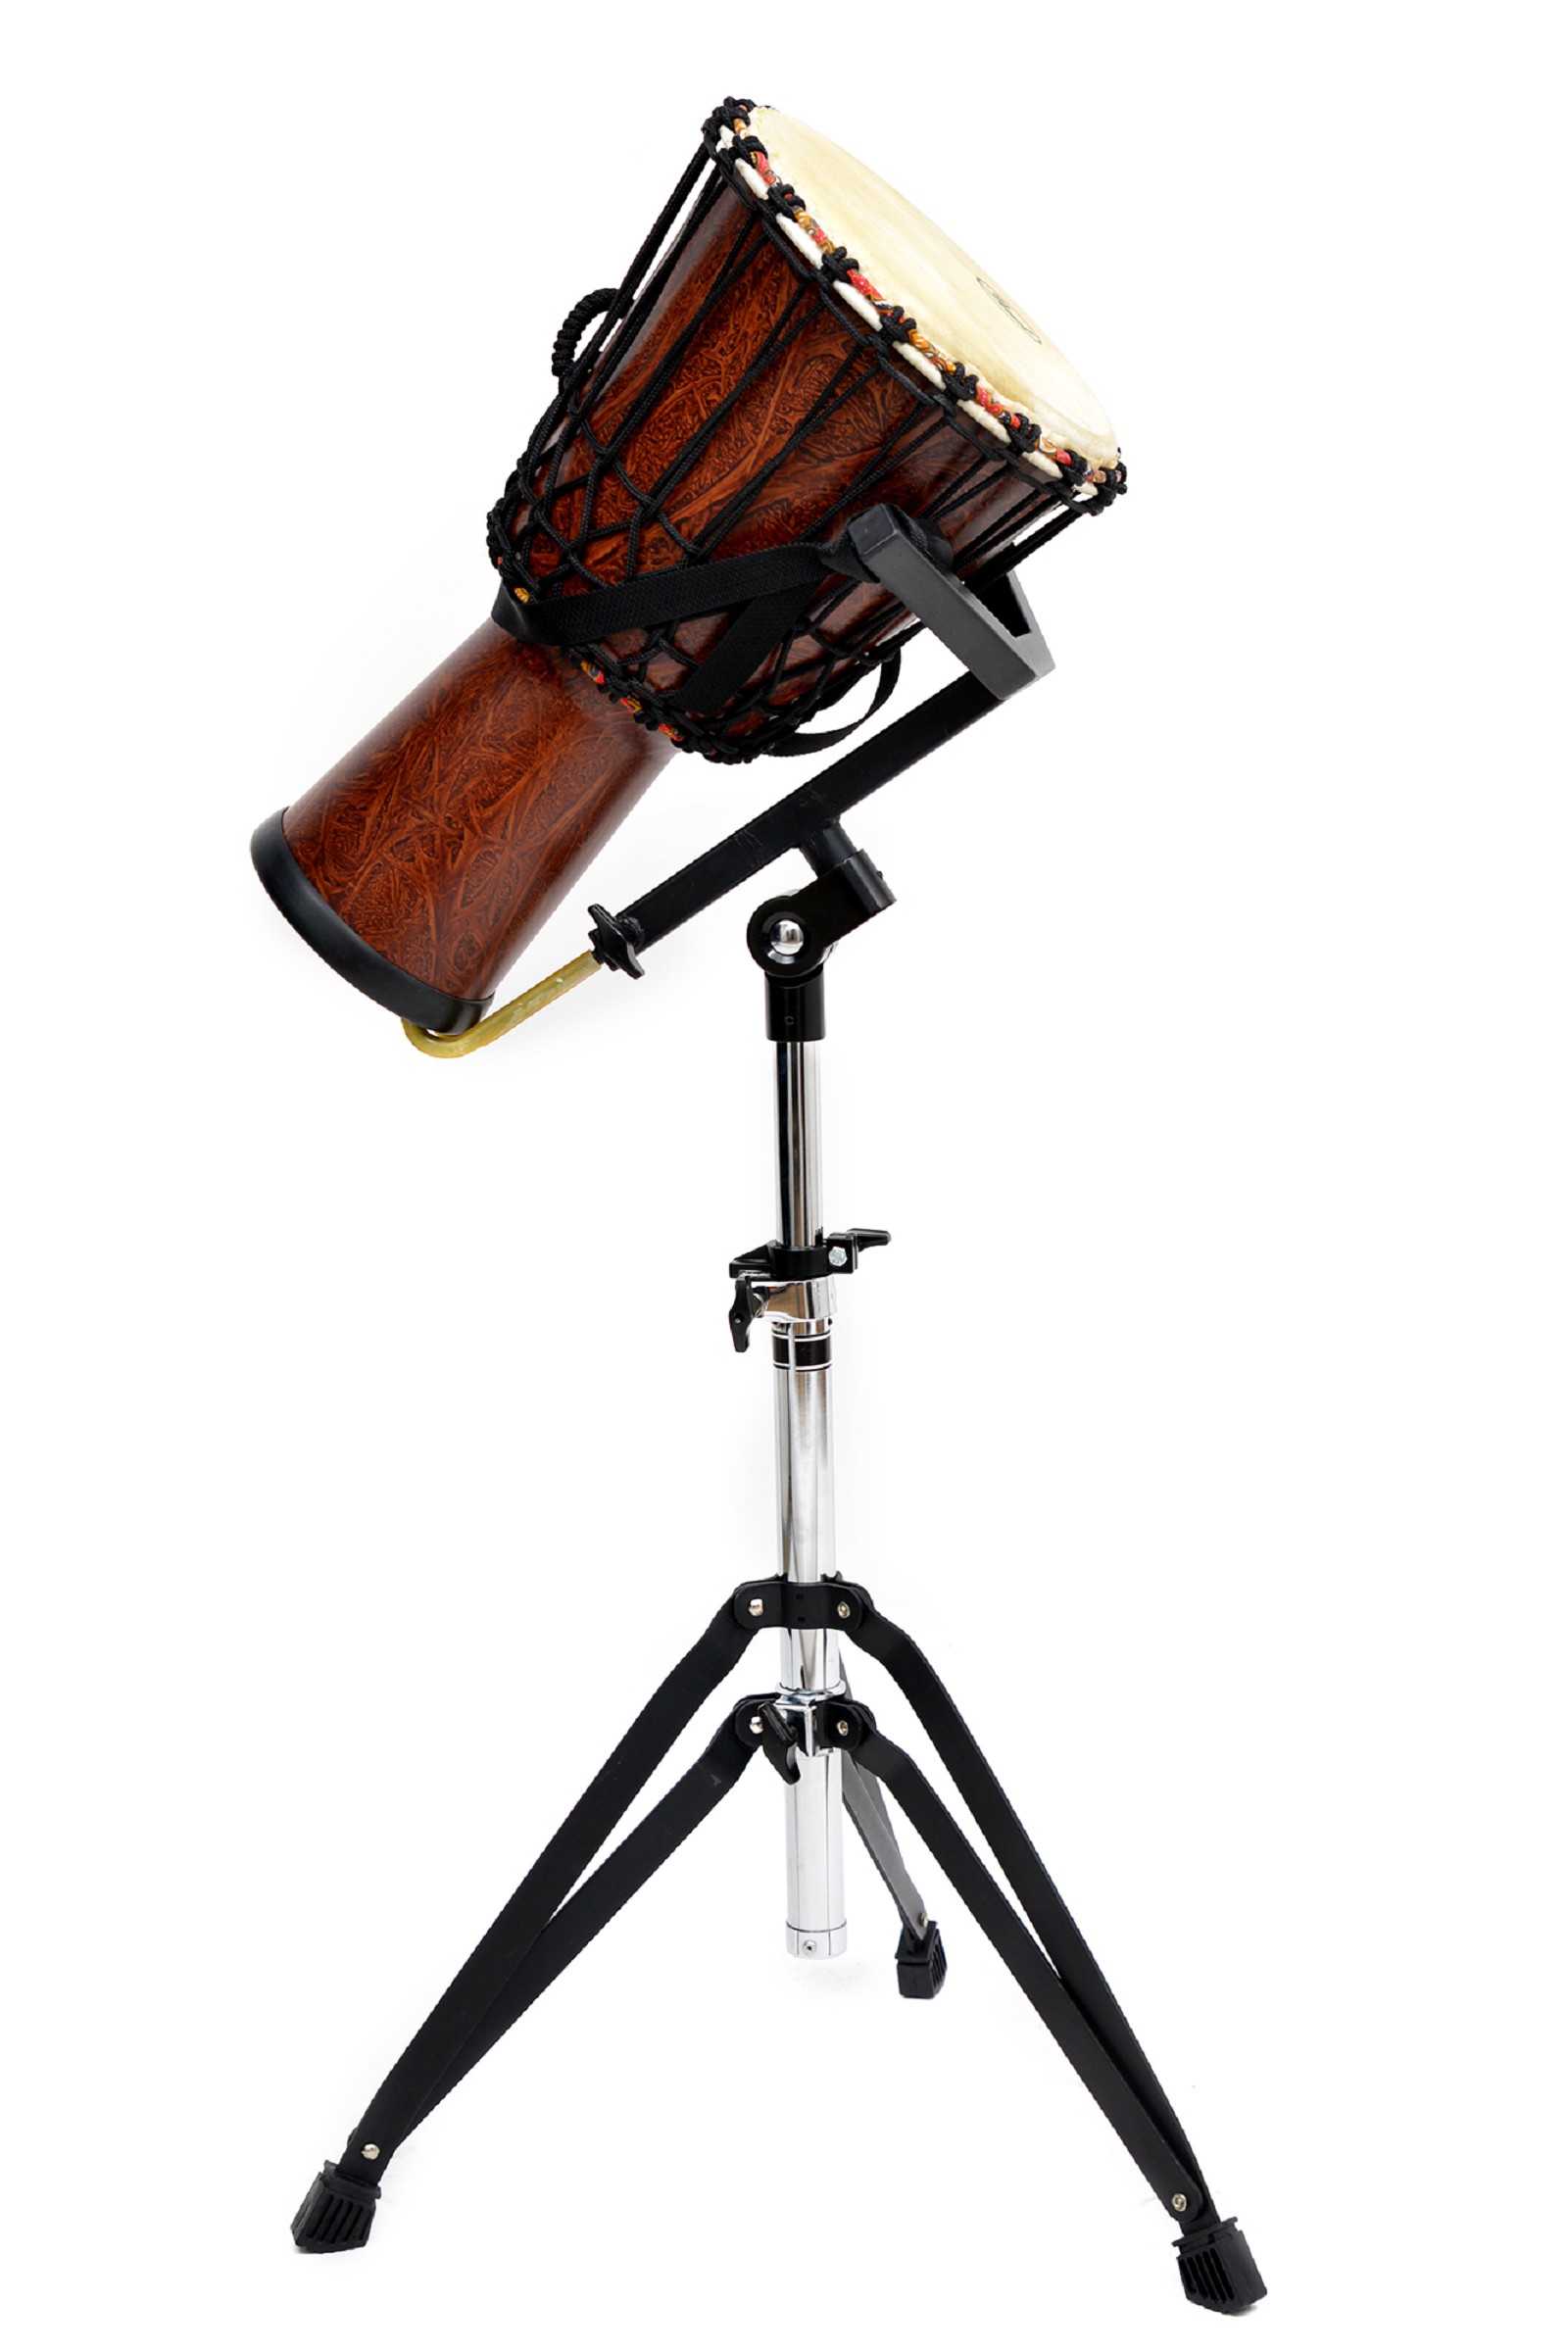 Pearl PJF-100S629 Primero Rope Tuned Djembe & Stand Pack